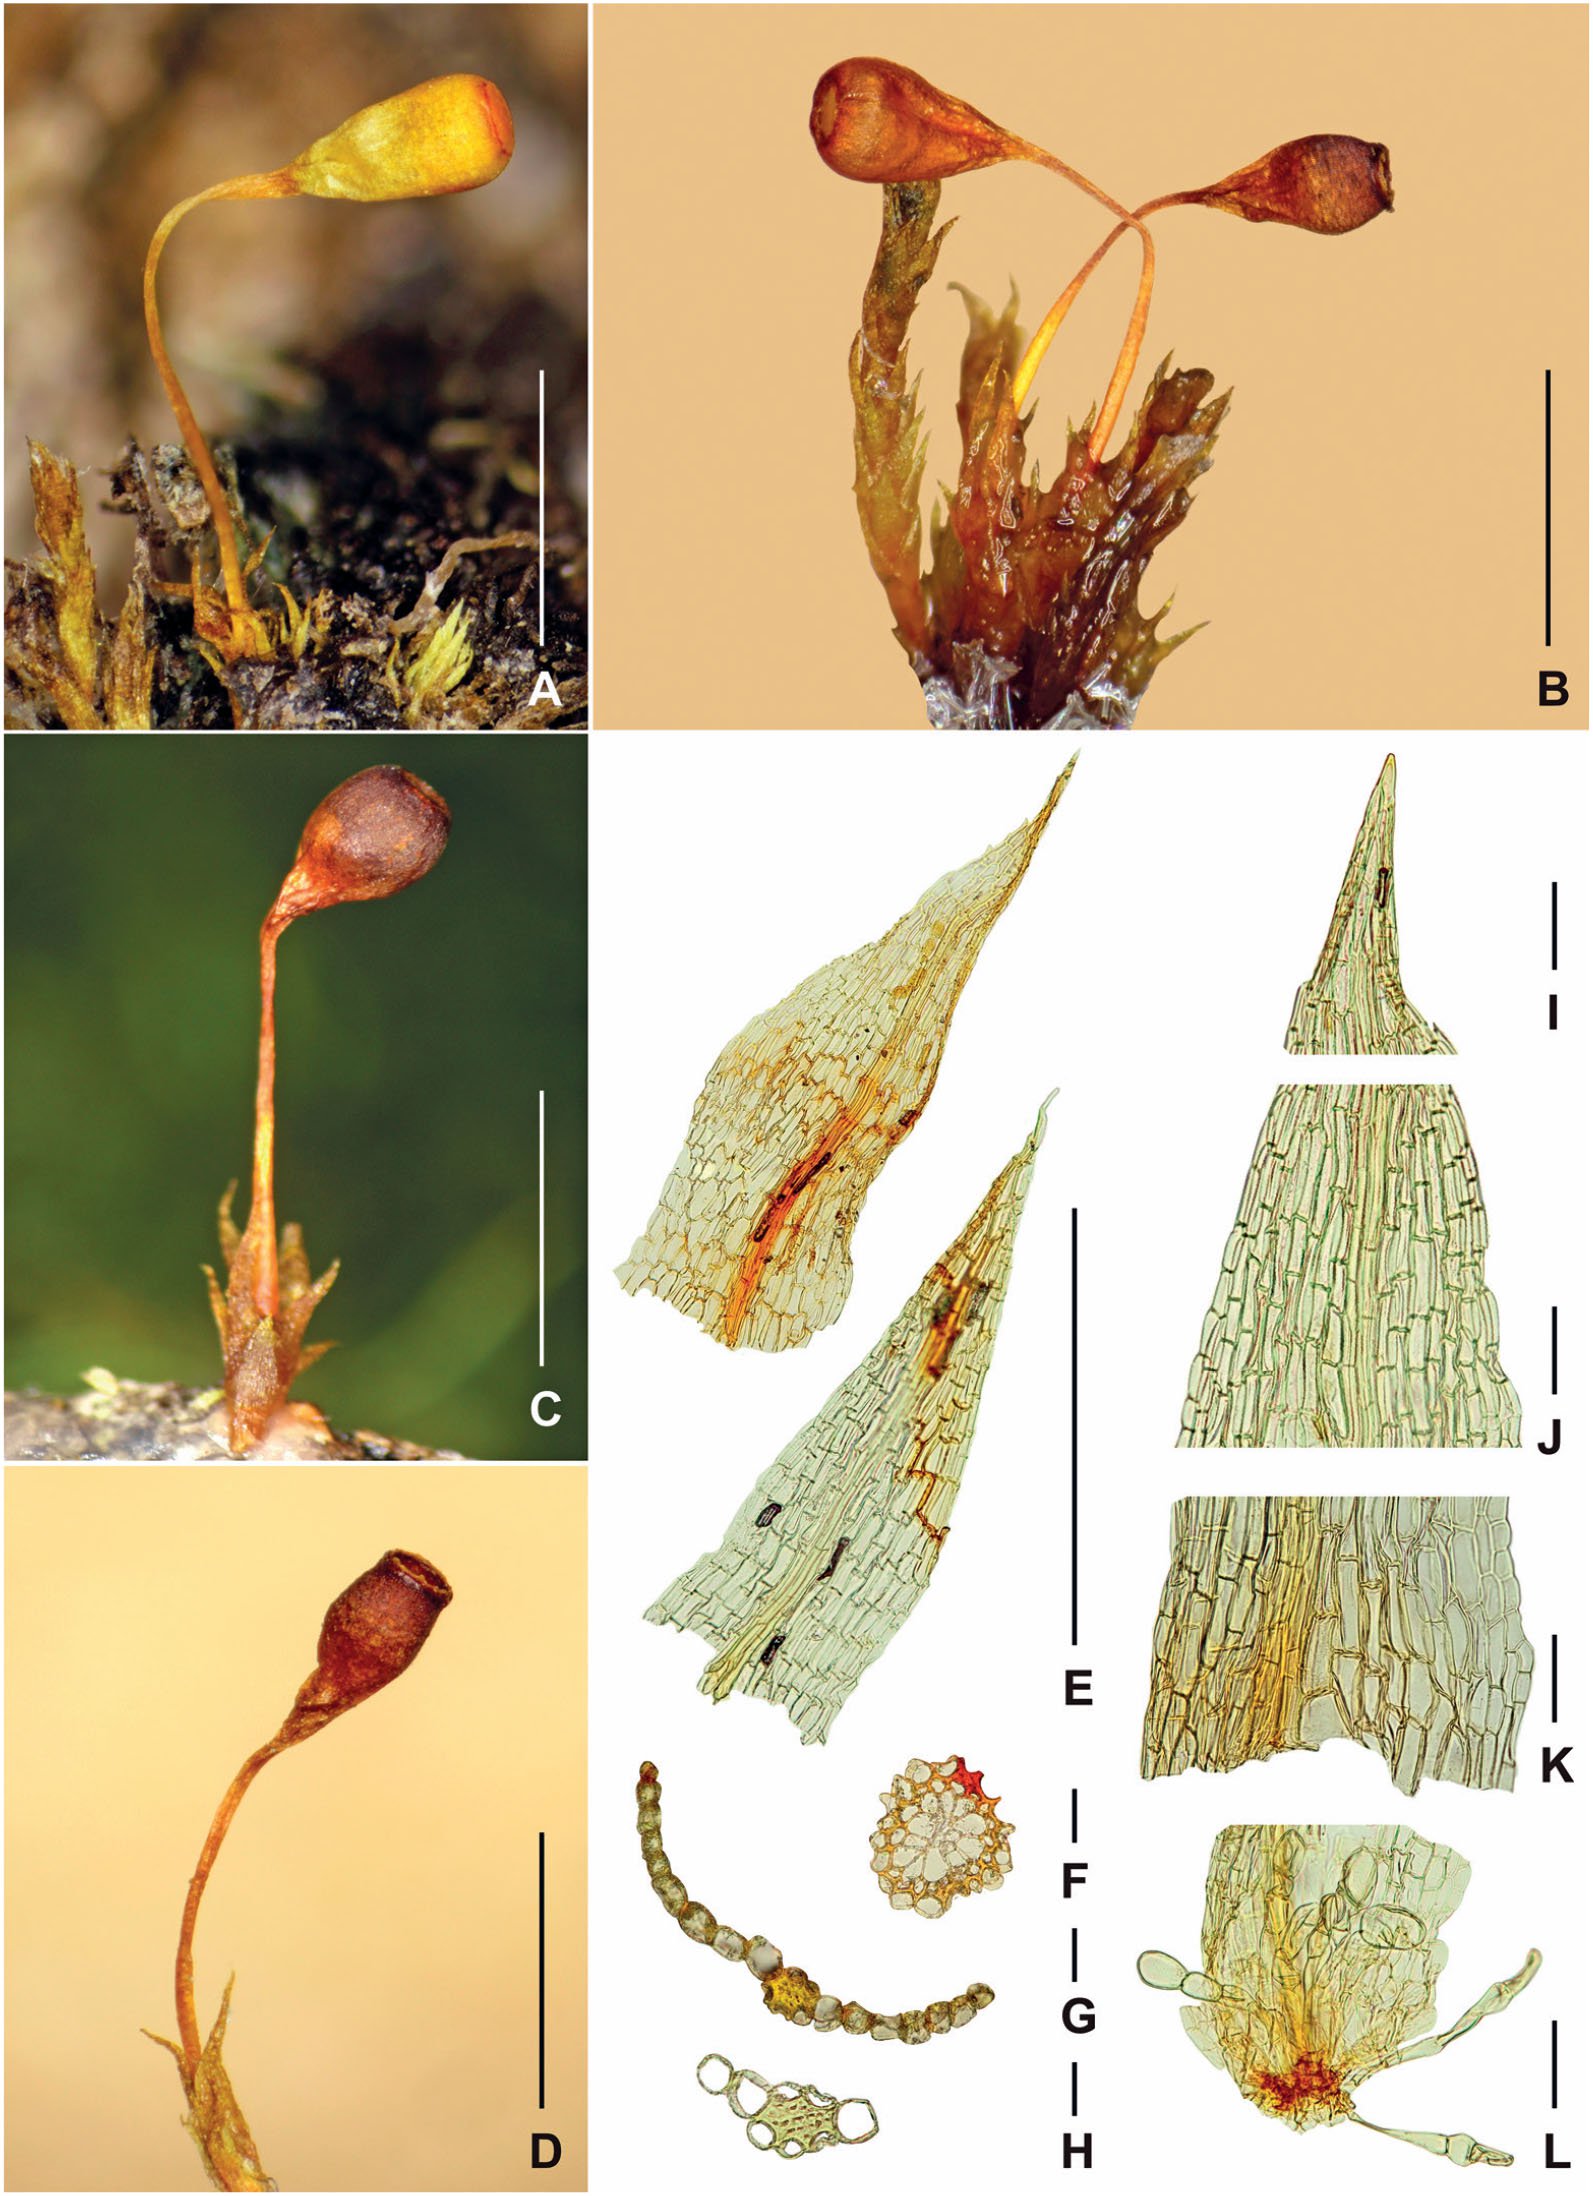 https://bioone.org/journals/Herzogia/volume-32/issue-2/heia.32.2.2019.326/Entosthodon-productus-Bryophyta-Funariaceae-an-addition-to-the-moss-flora/10.13158/heia.32.2.2019.326.full